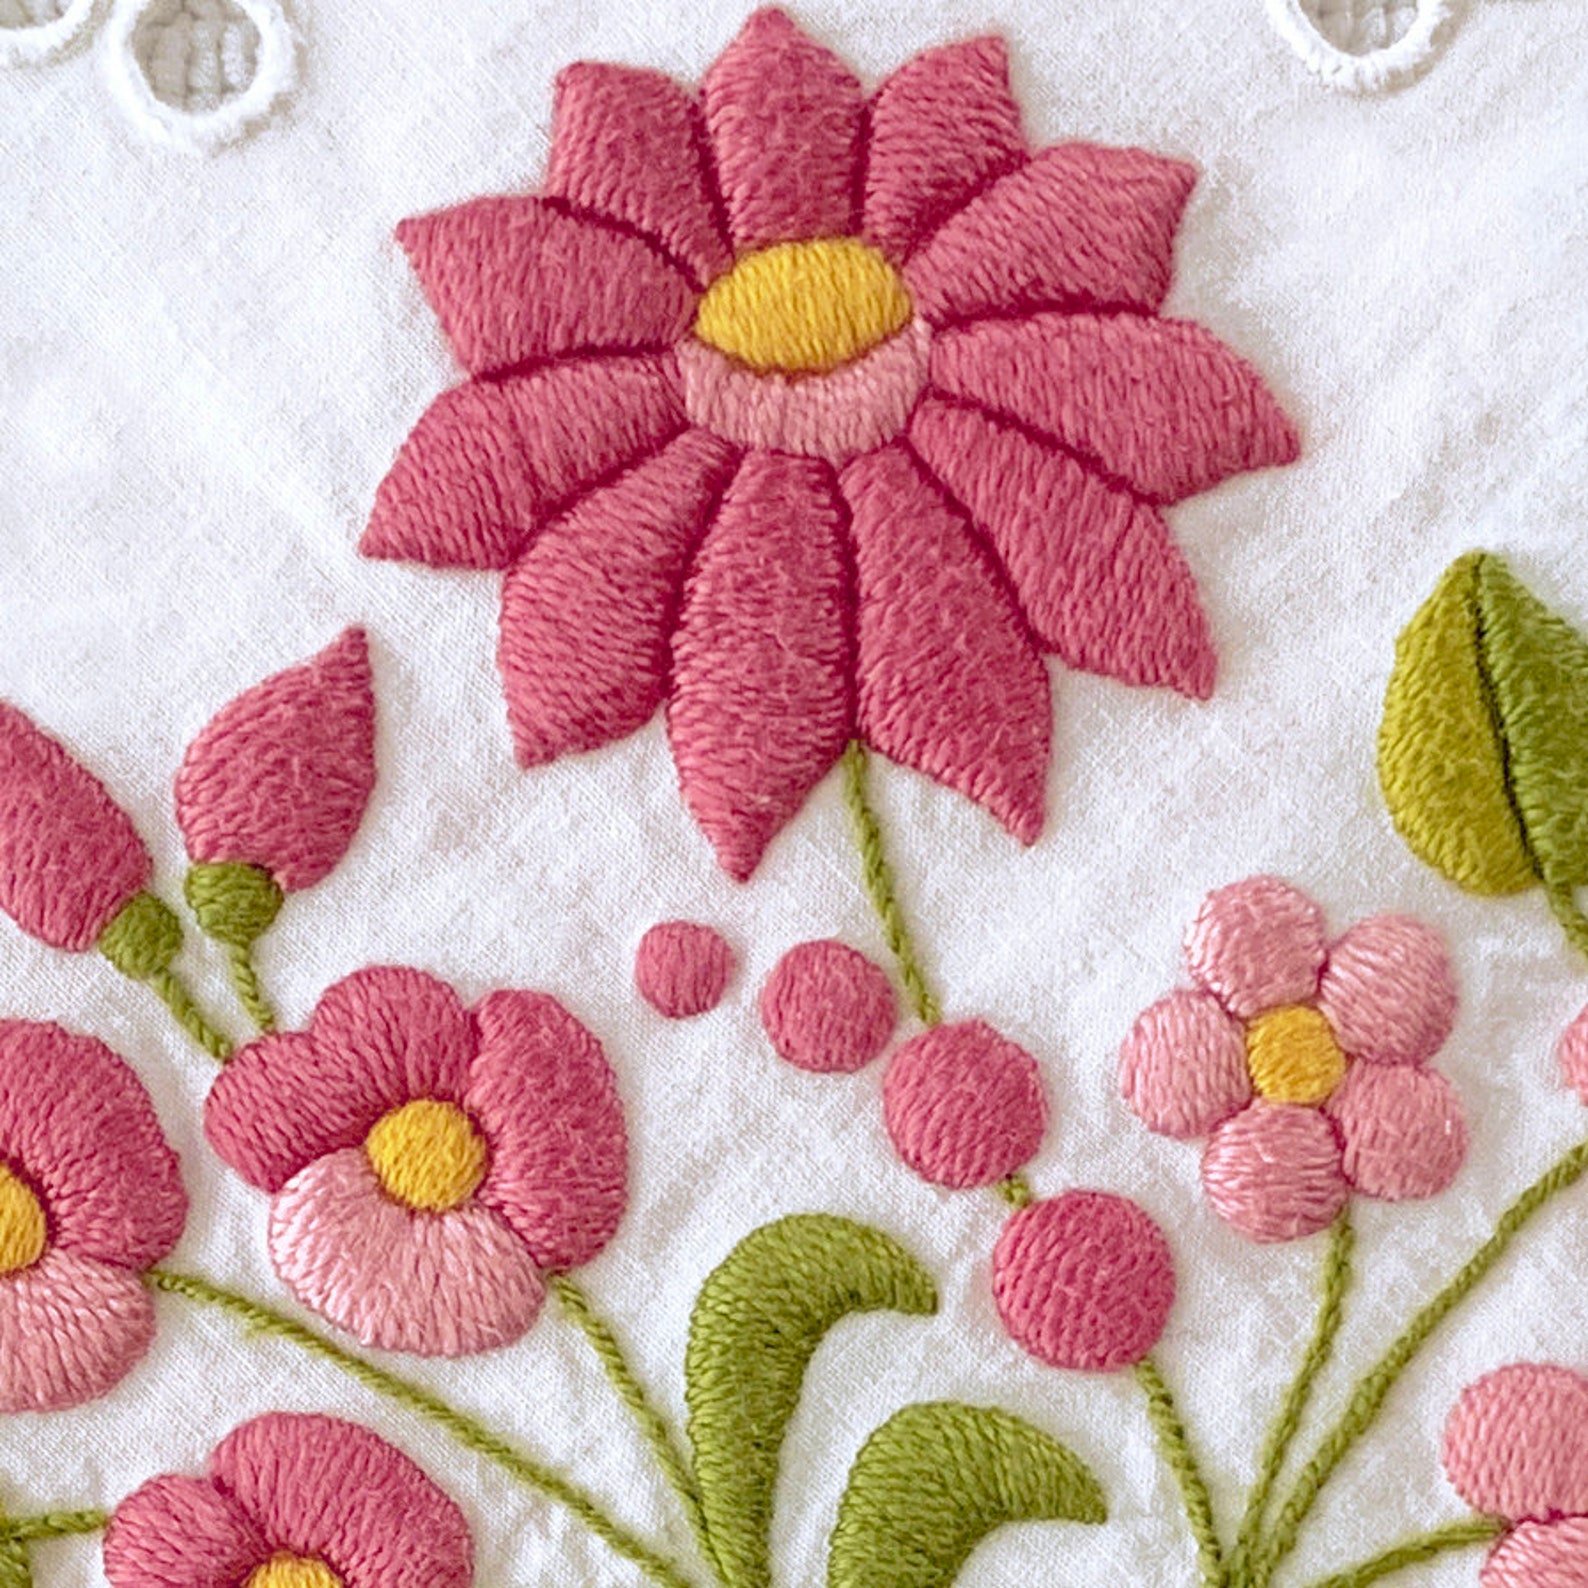 Red Scalloped Beginner Embroidery Kit - Hungarian Store